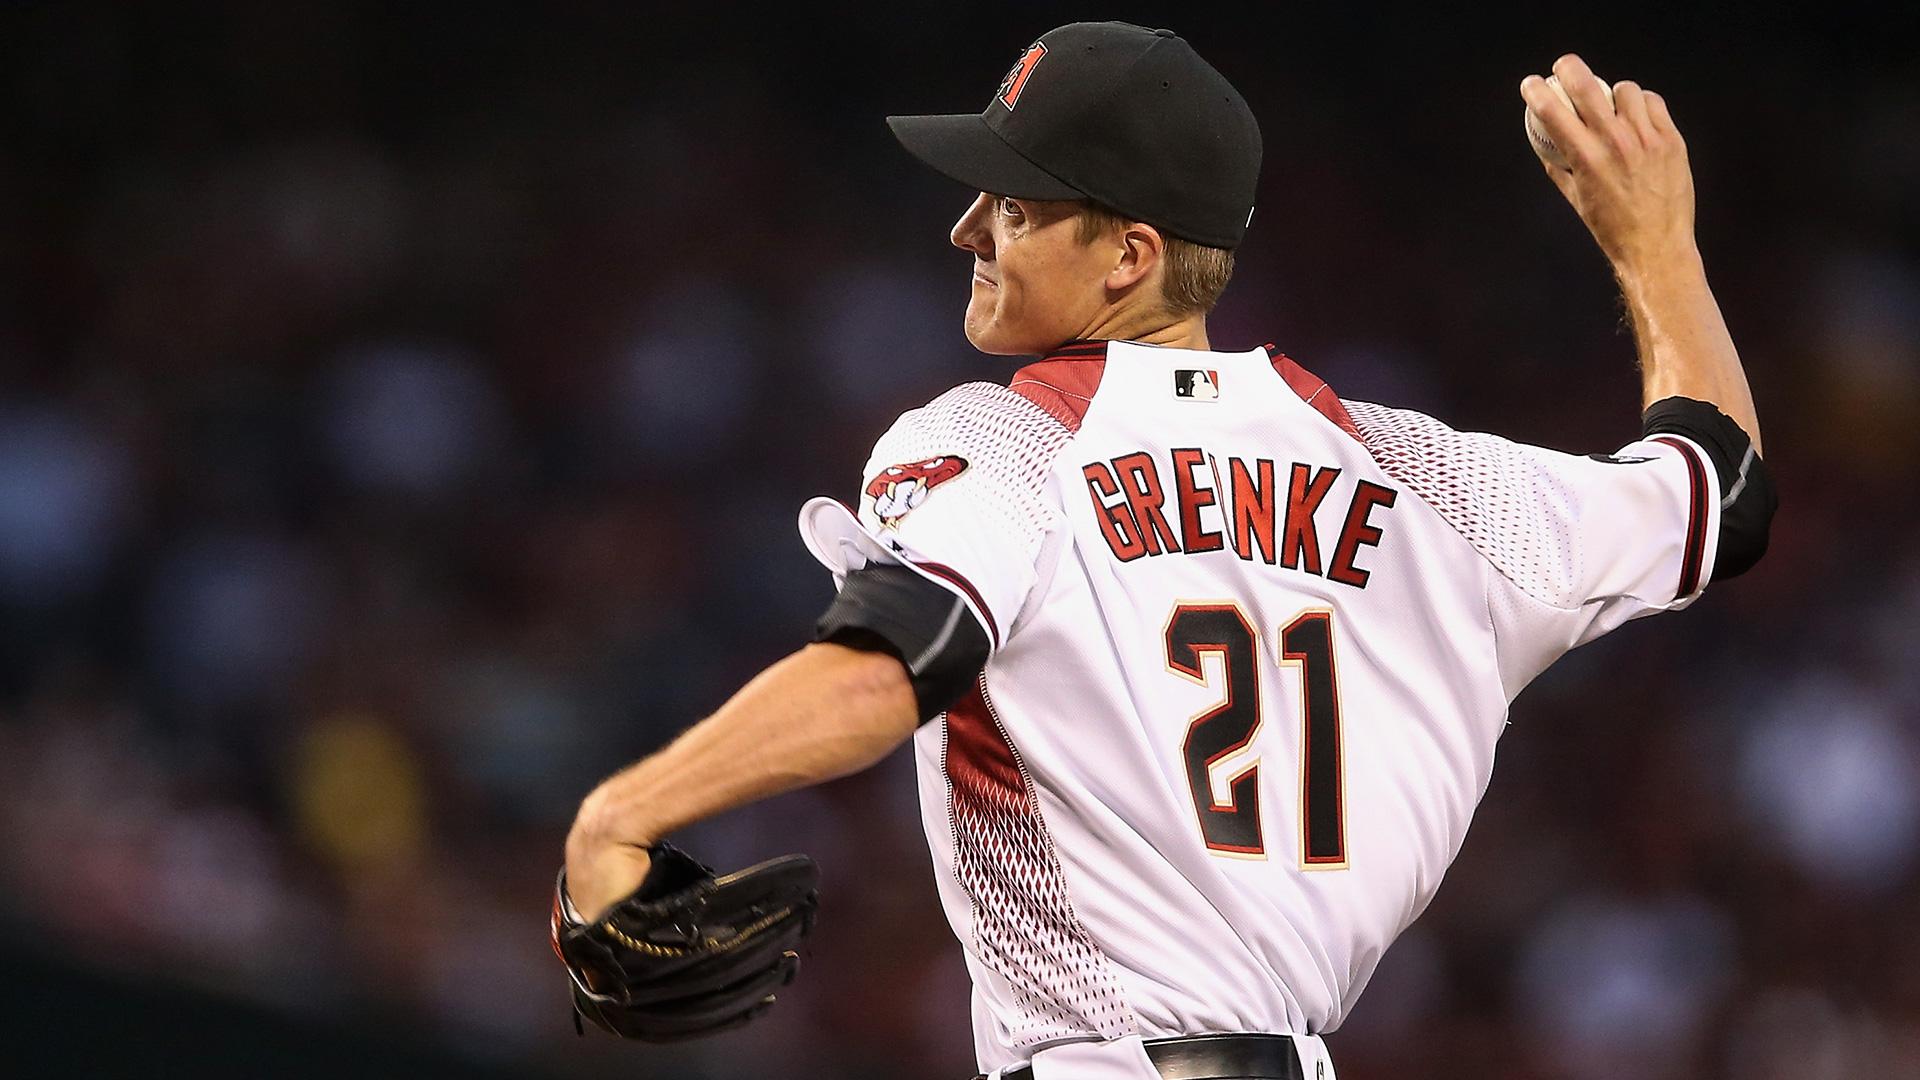 Zack Greinke's big contract could cost him the Hall of Fame. MLB